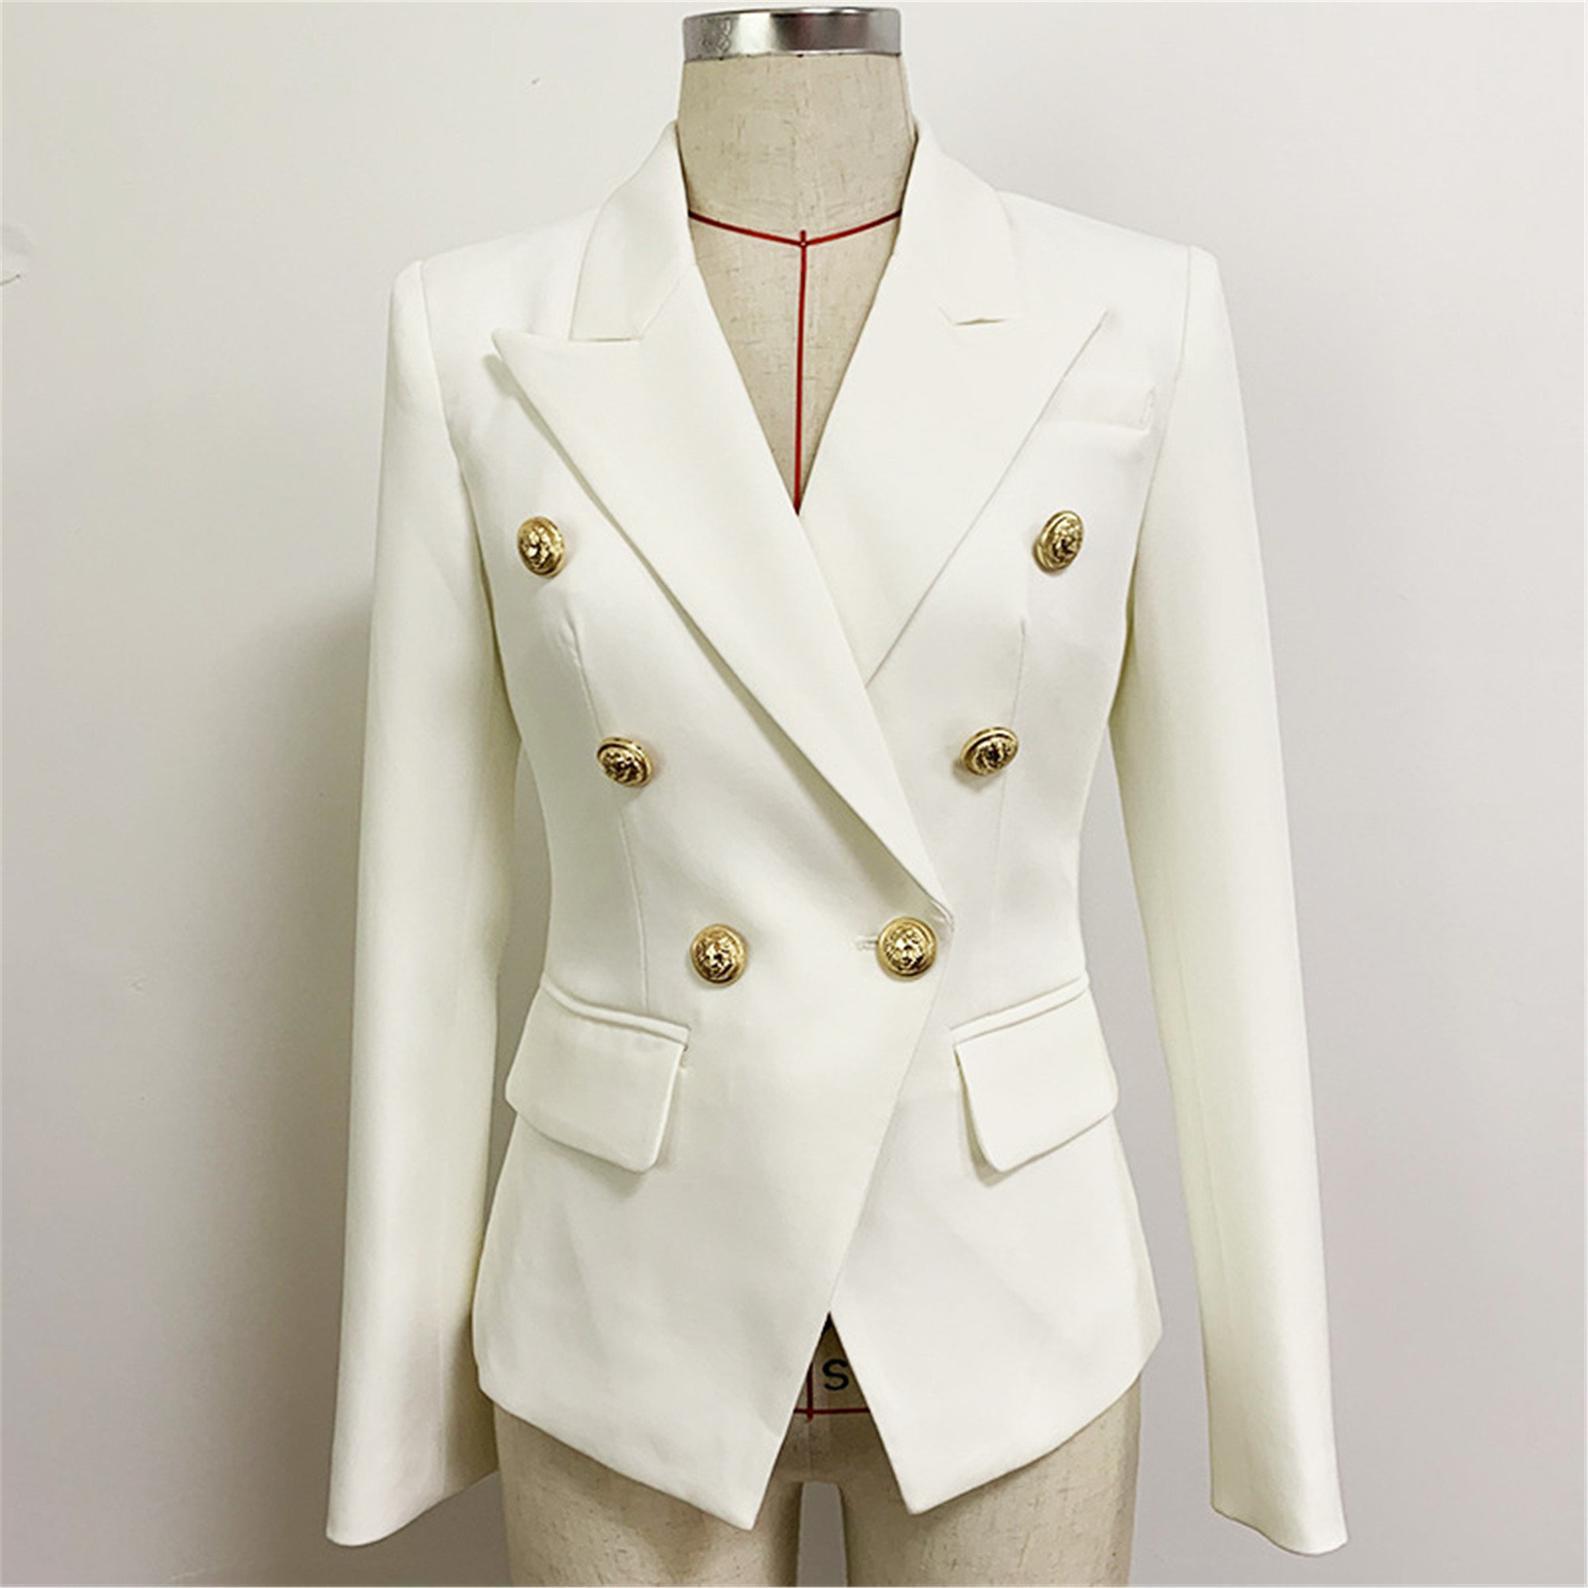 Women's Luxury Fitted Blazer Golden Lion Buttons Coat red UK CUSTOMER SERVICE!  Women's Luxury Fitted Blazer Golden Lion Buttons Coat red - Suit for spring, summer, fall and winter. Classic and Unique design will make you look more charming when you dress it in any professional occasion.  The Blazer fitted jacket has a golden button frontage with single button closure. Polyester ,Fastening: Button. Slim Fit. Long Sleeve. 